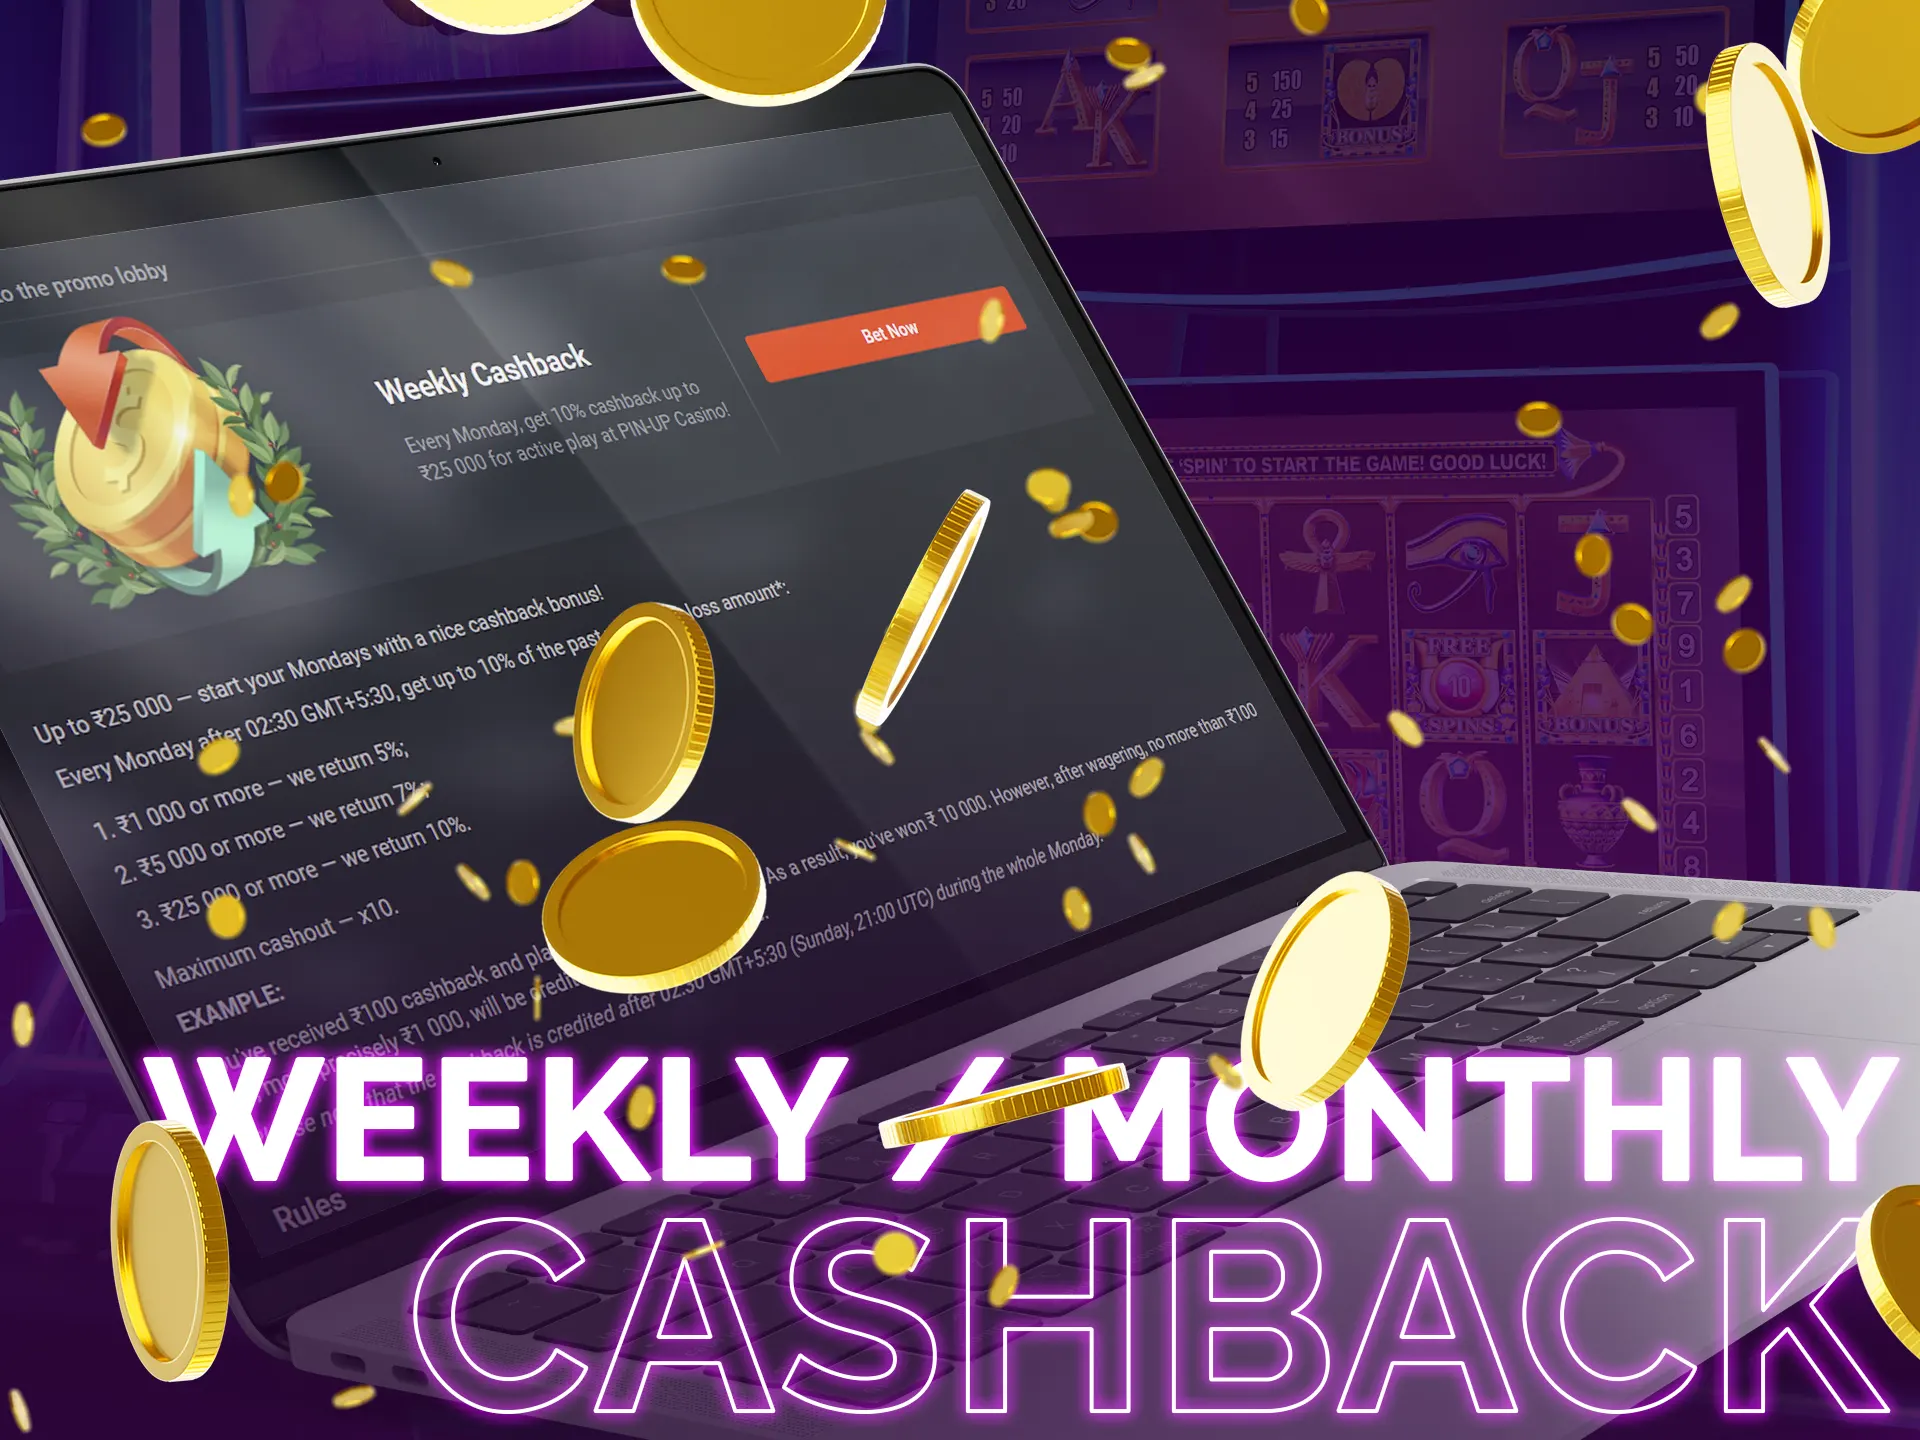 Each month and week you can use cashback bonus.